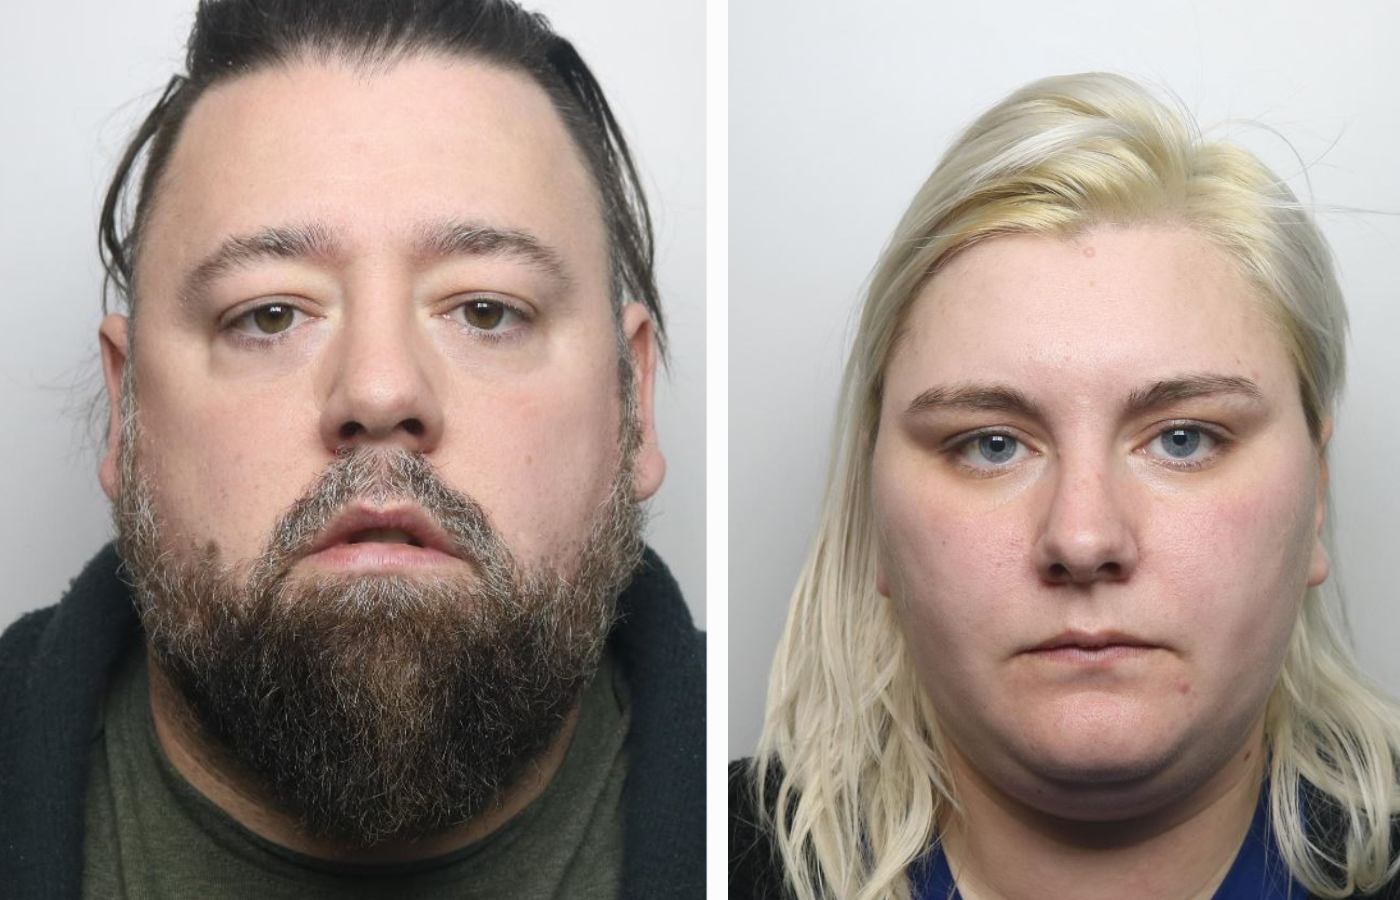 Craig Crouch and Gemma Barton will be sentenced on Friday.